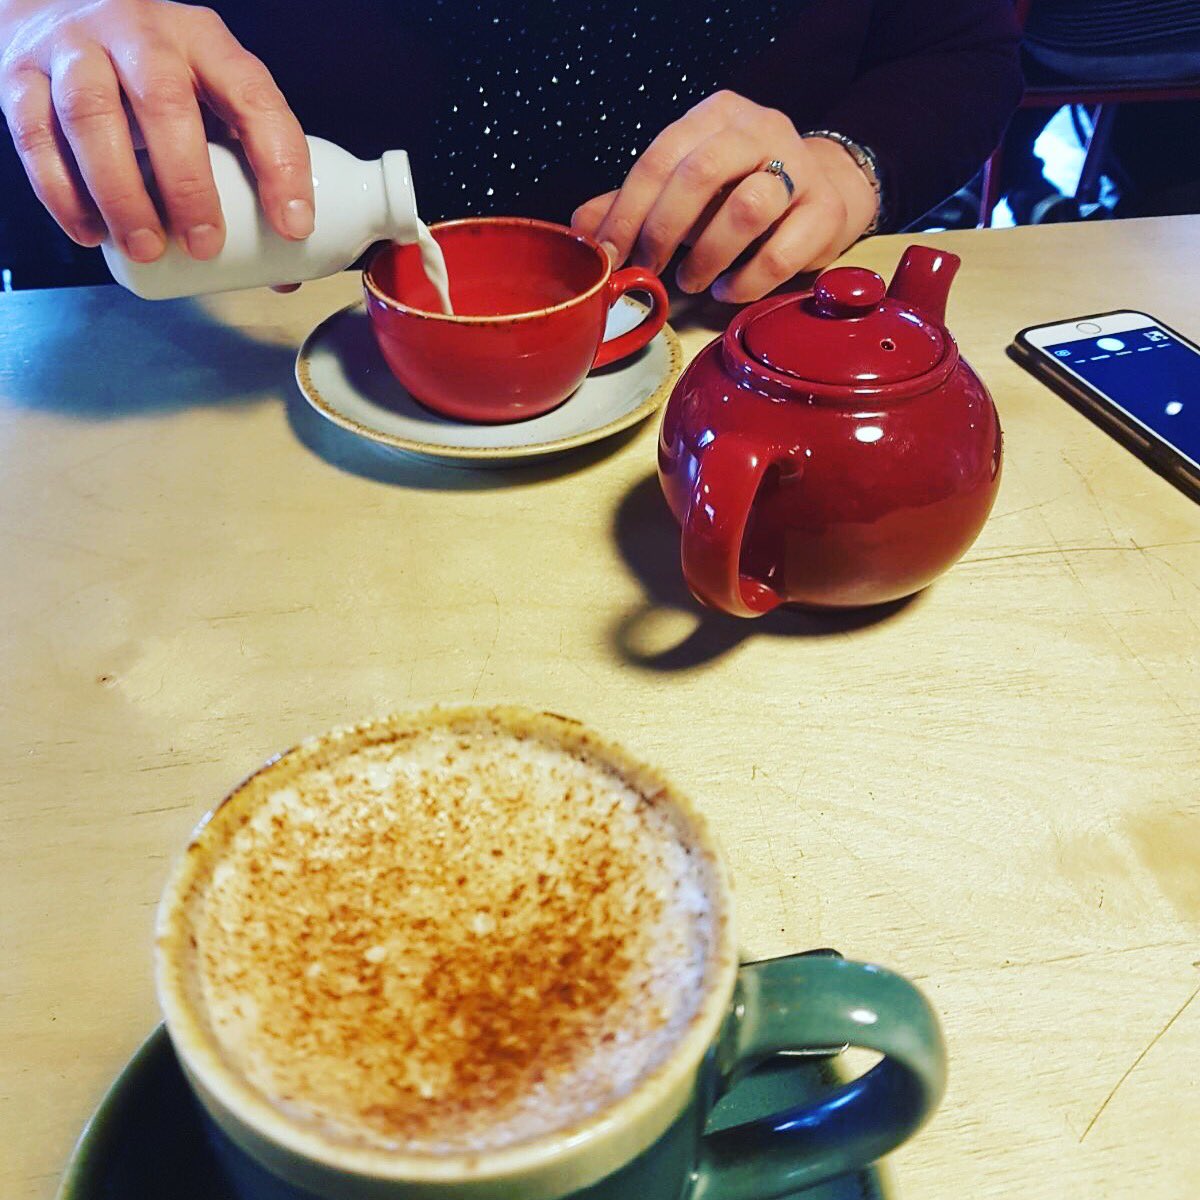 A lovely #cupoftea & a #chai #latte  from @ezraandgil with @mrsmlatham on a #foodie #dayout in #manchester #igers #mcrigers